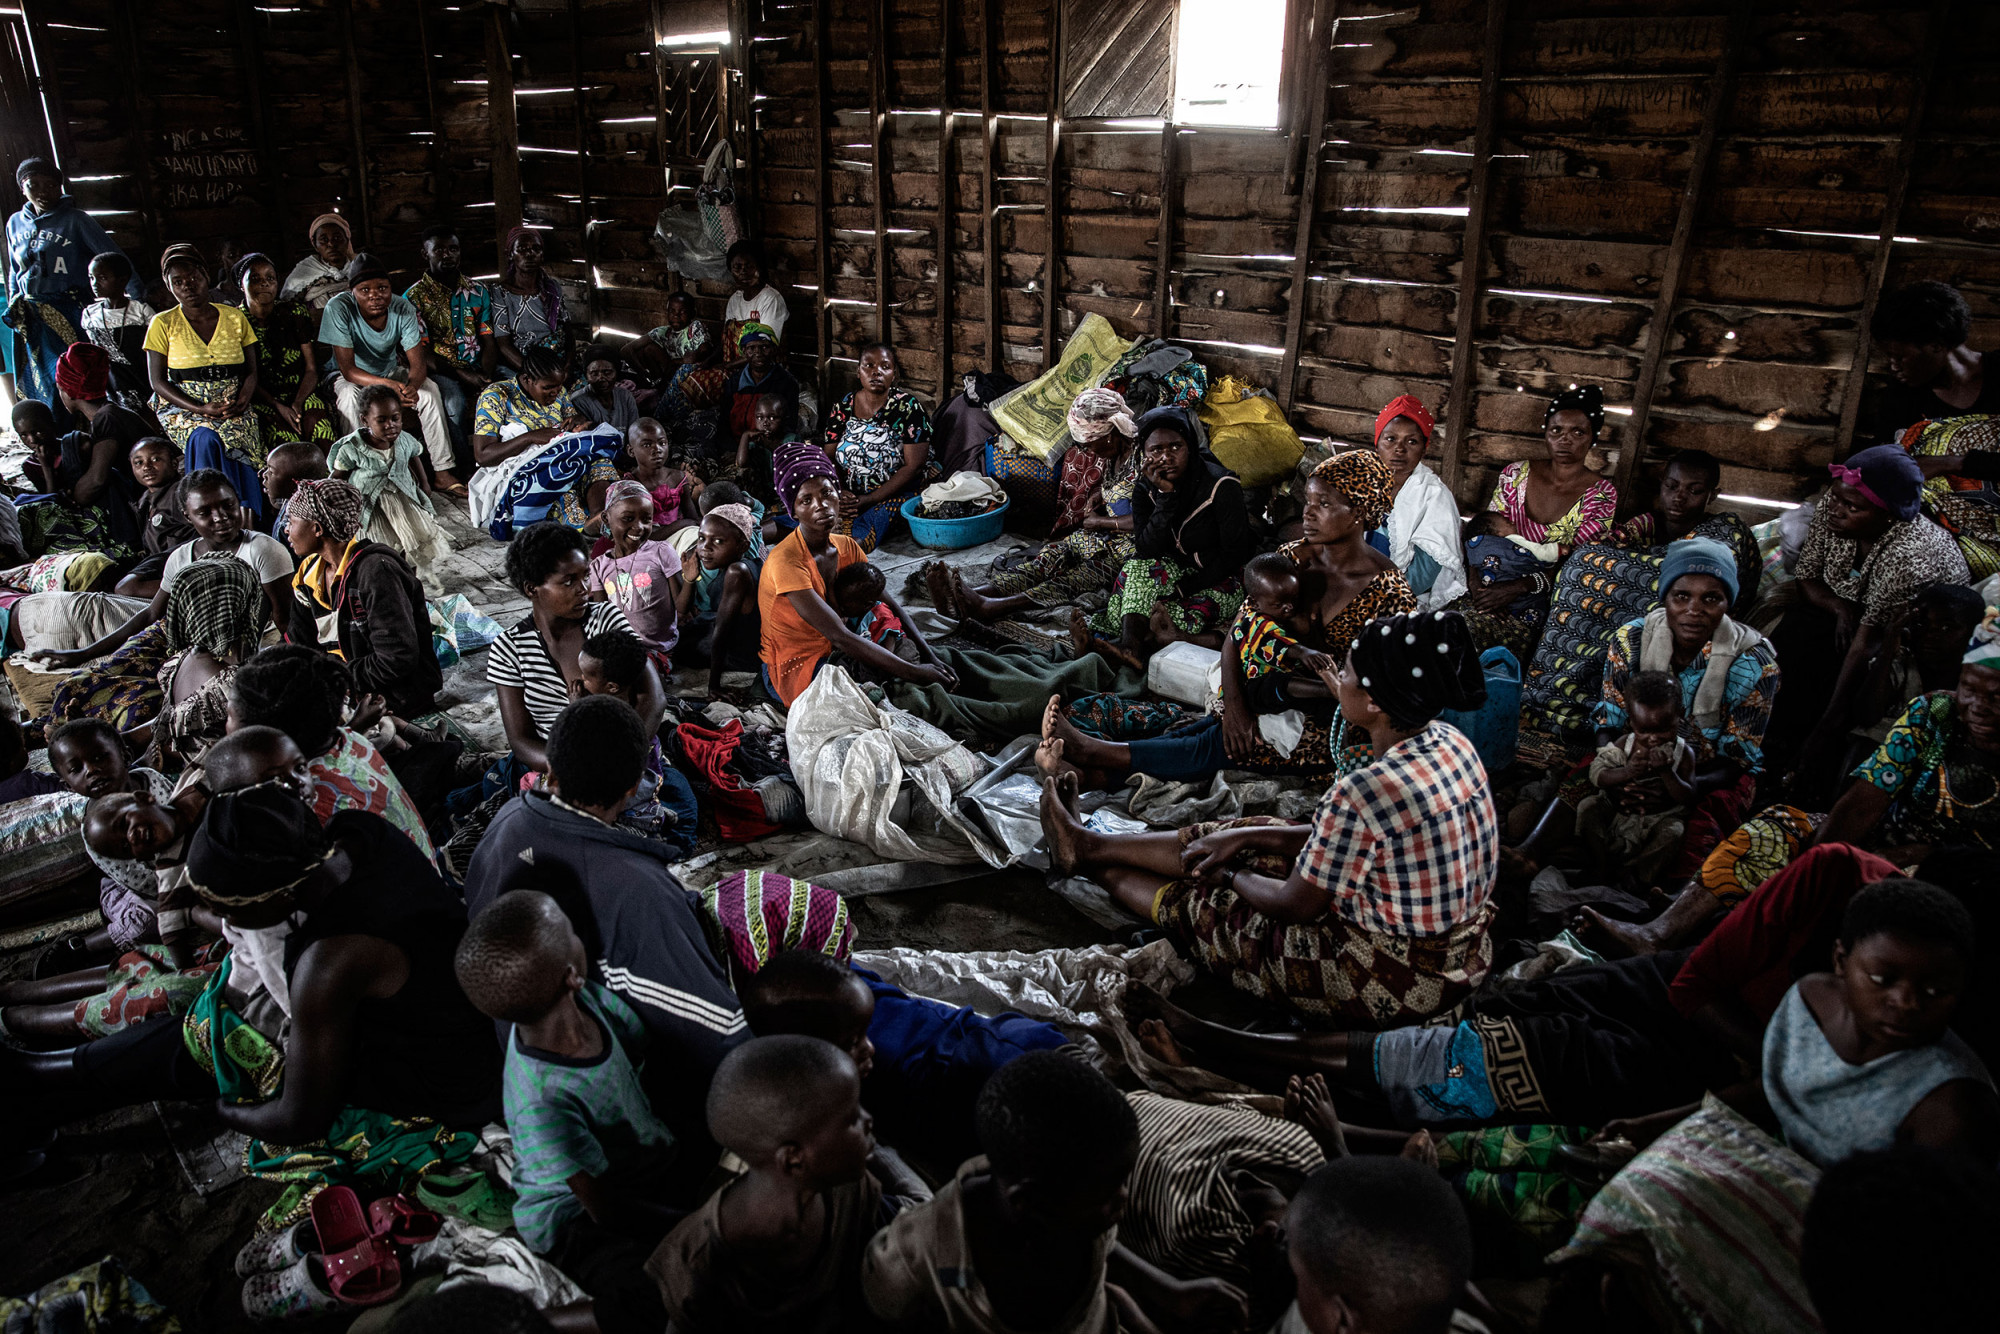 North Kivu, June 2, 2021. Women and children take shelter in a church in the town of Sake in eastern Democratic of Congo on Wednesday, 11 days after a volcanic eruption forced the evacuation of much of the nearby city of Goma and left 32 people dead and 20,000 homeless. Hundreds of thousands of people have been displaced, and more than 500,000 people have no access to clean drinking water after Goma’s main reservoir and pipes were damaged during the eruption. © Finbarr O’Reilly for Fondation Carmignac